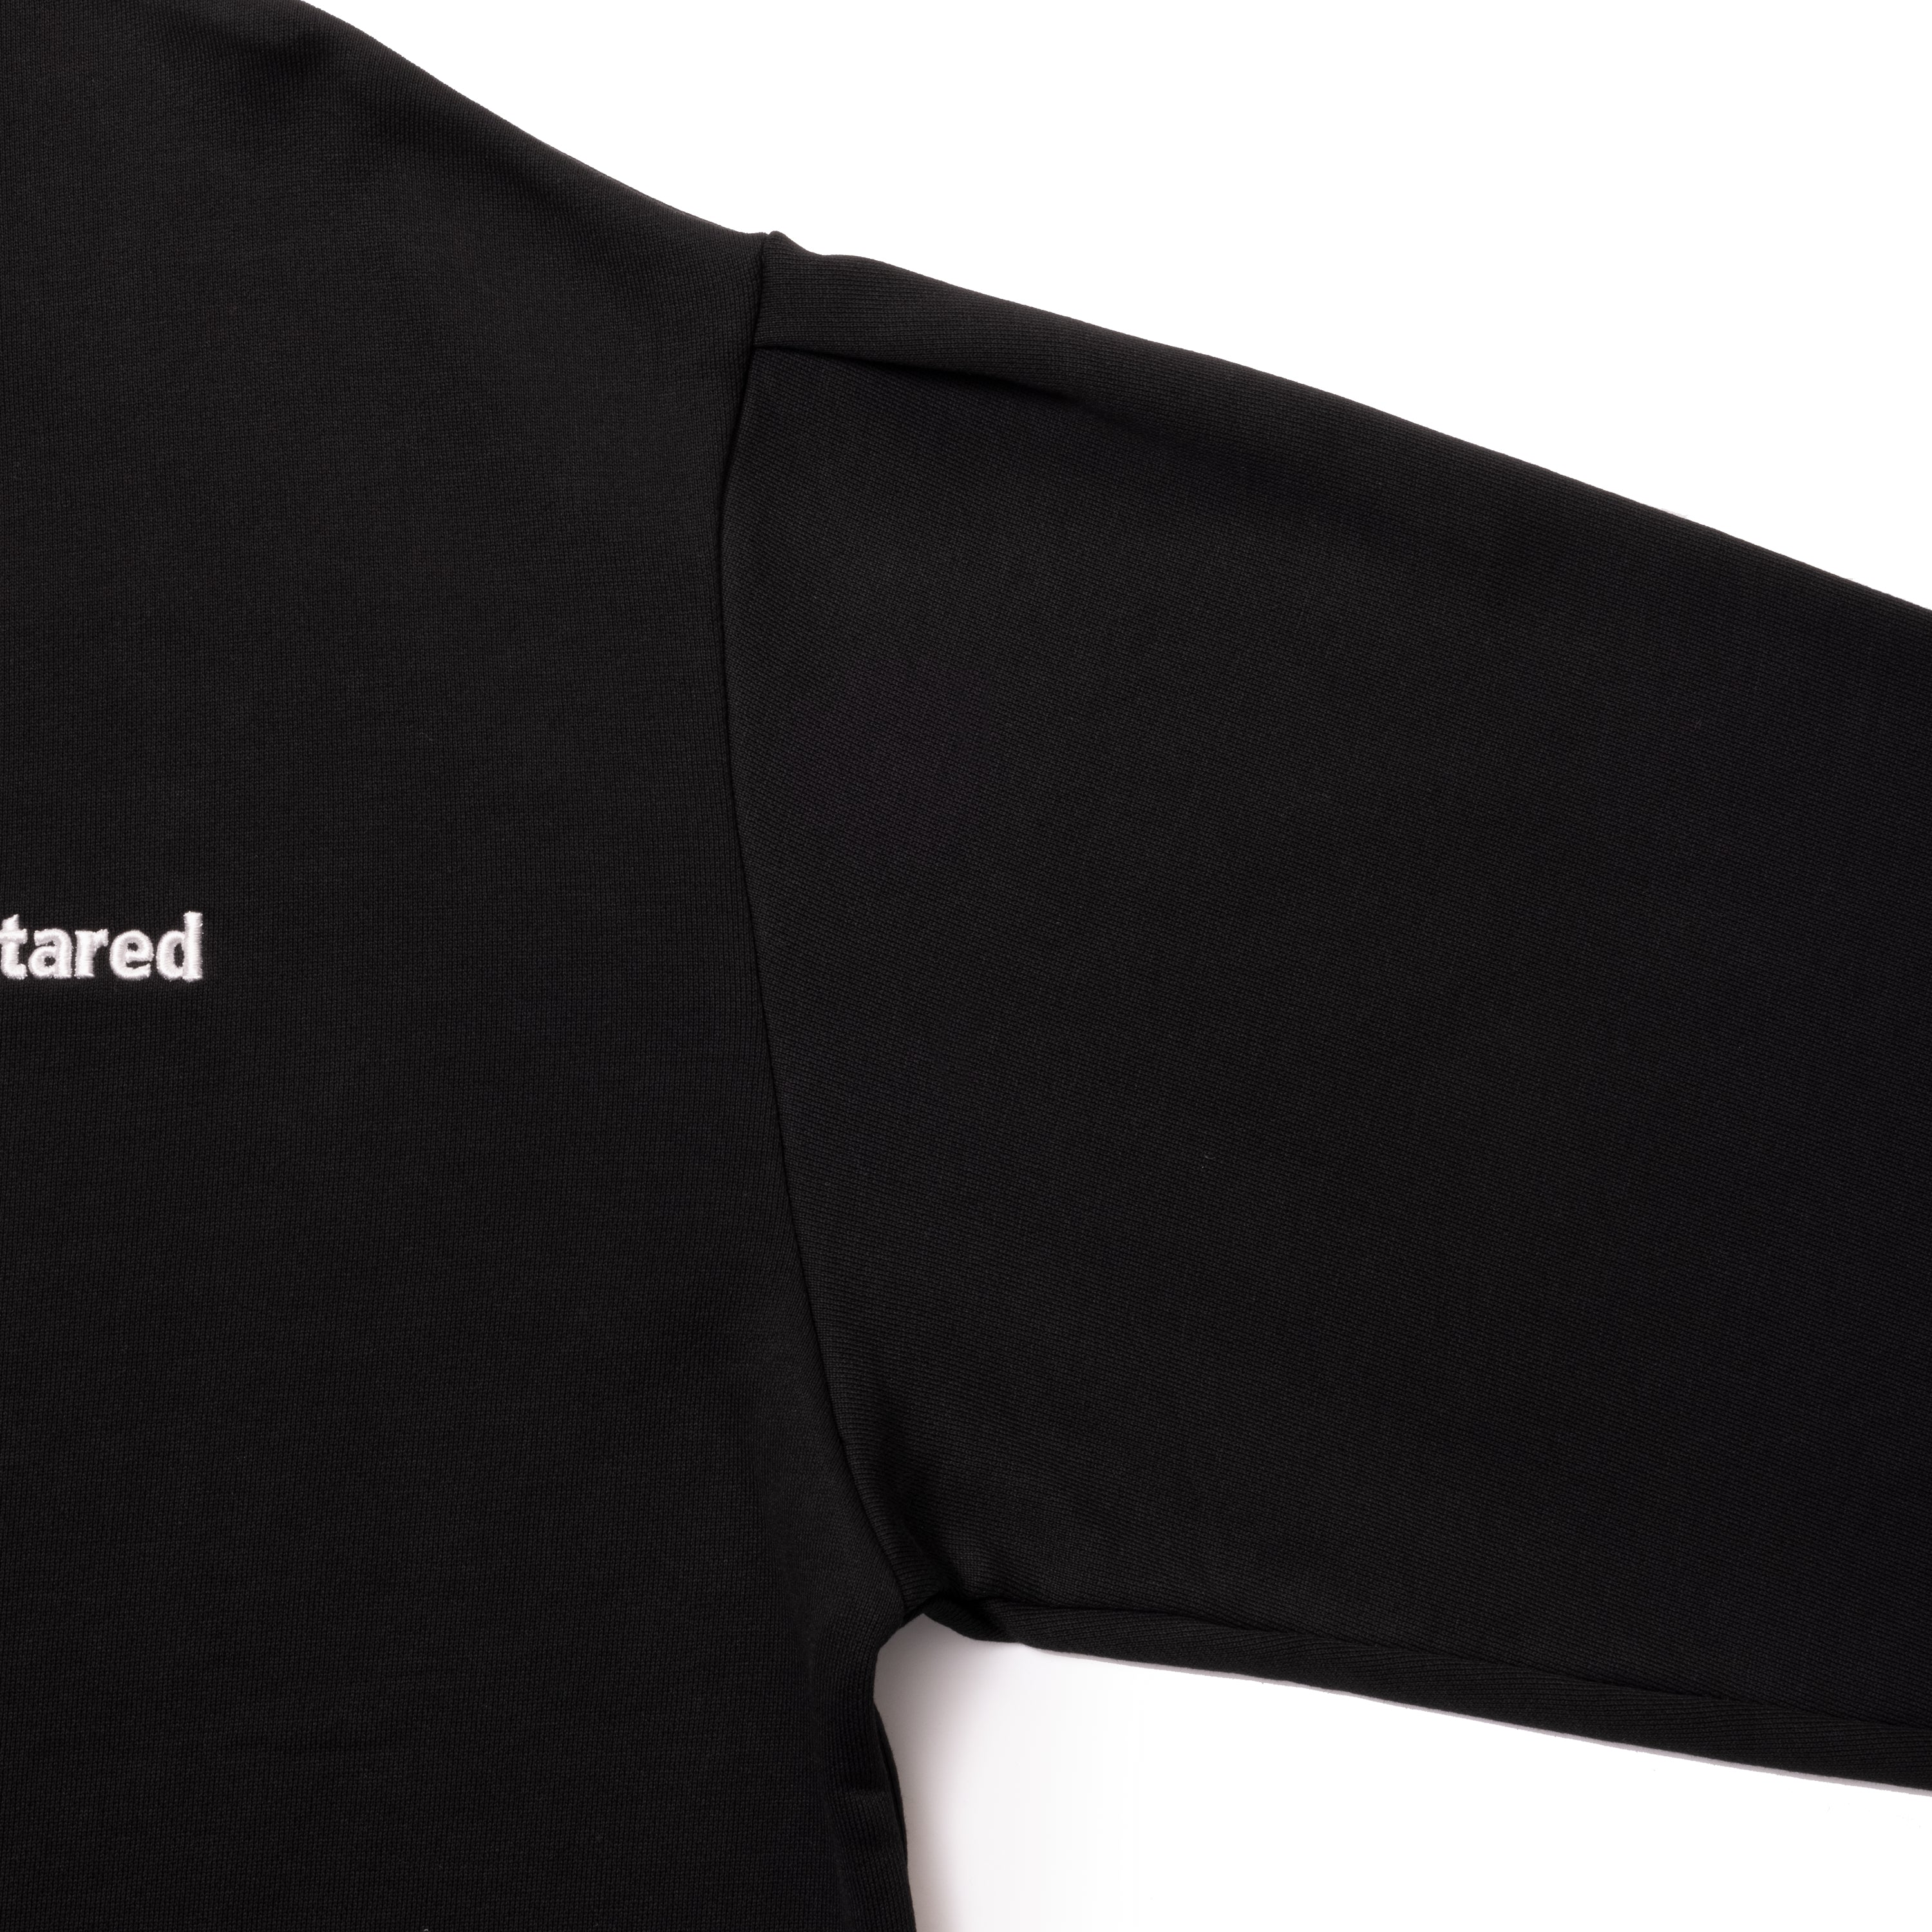 altared/Logo 3D Embroidery Pleated Sleeve Crew Neck Sweat[BLACK]